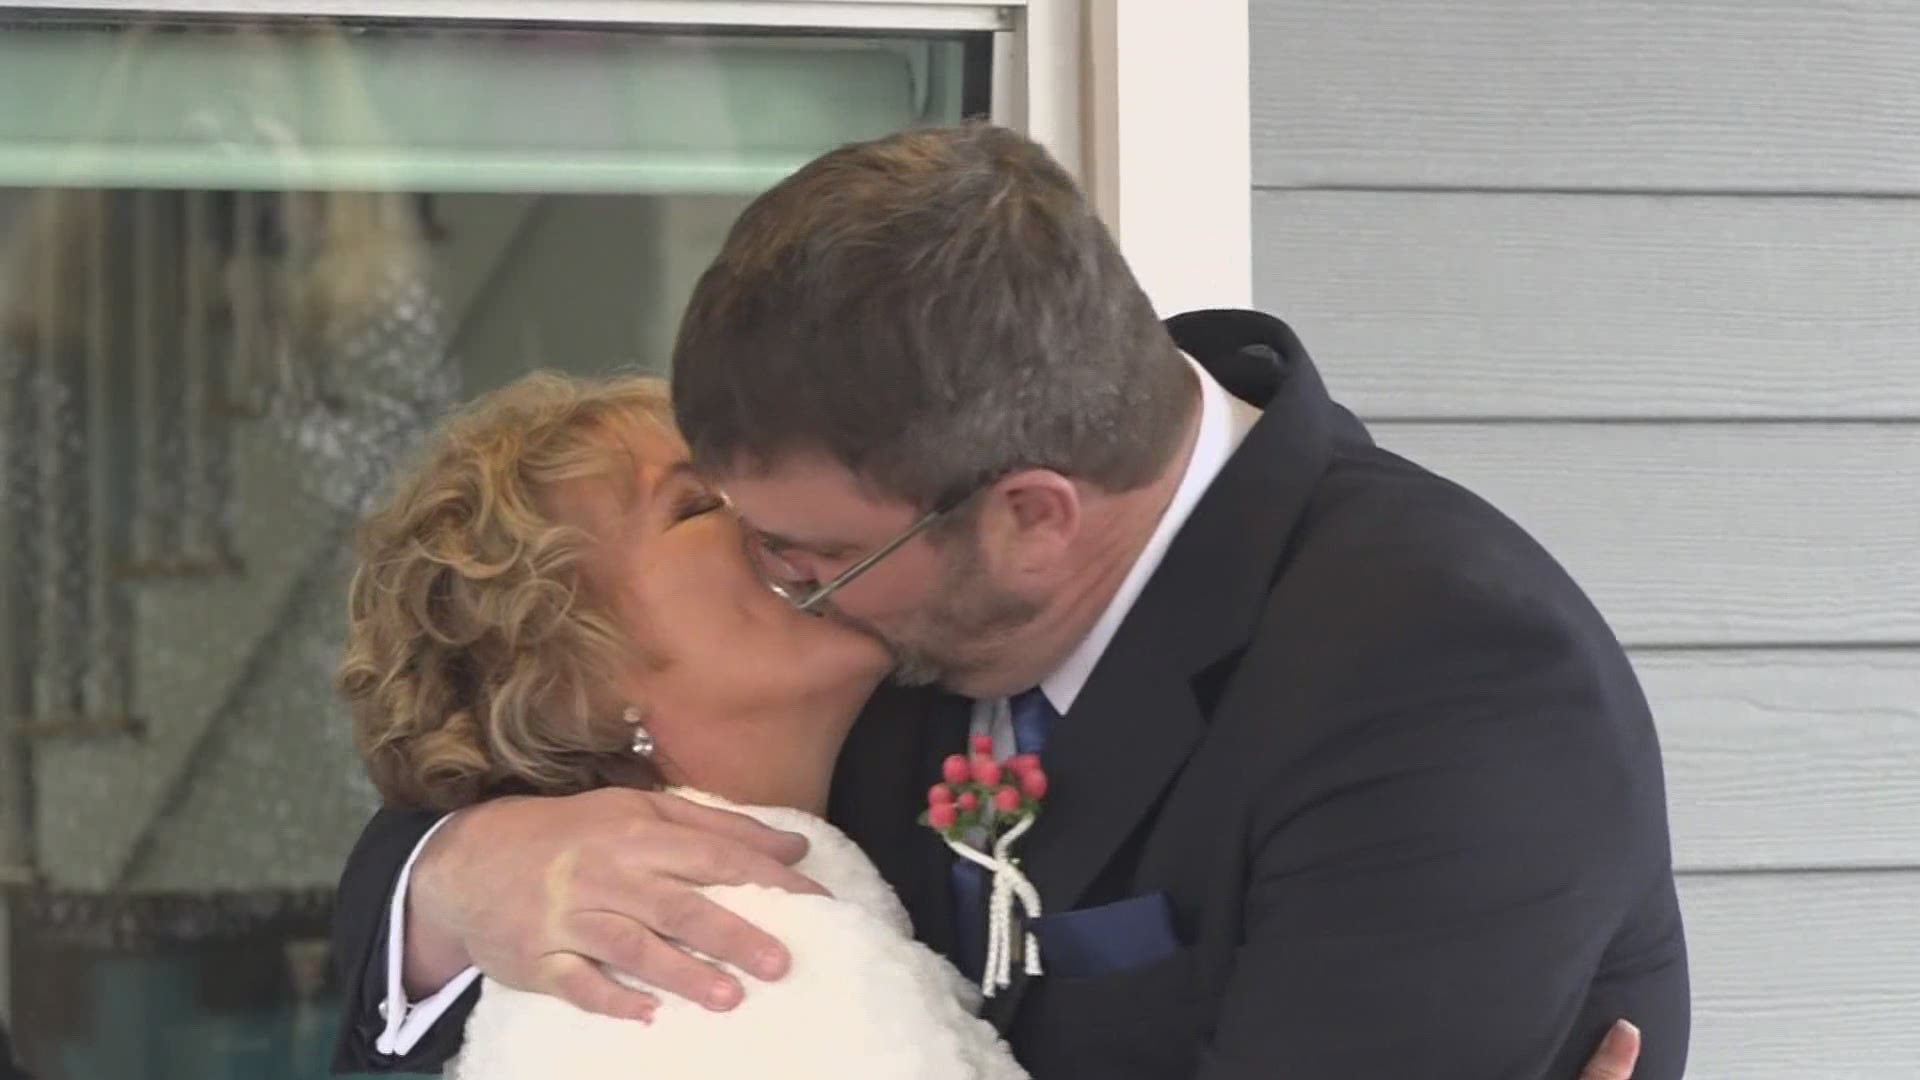 Northeast Harbor couple says "I Do" in a drive-thru wedding at their local bank